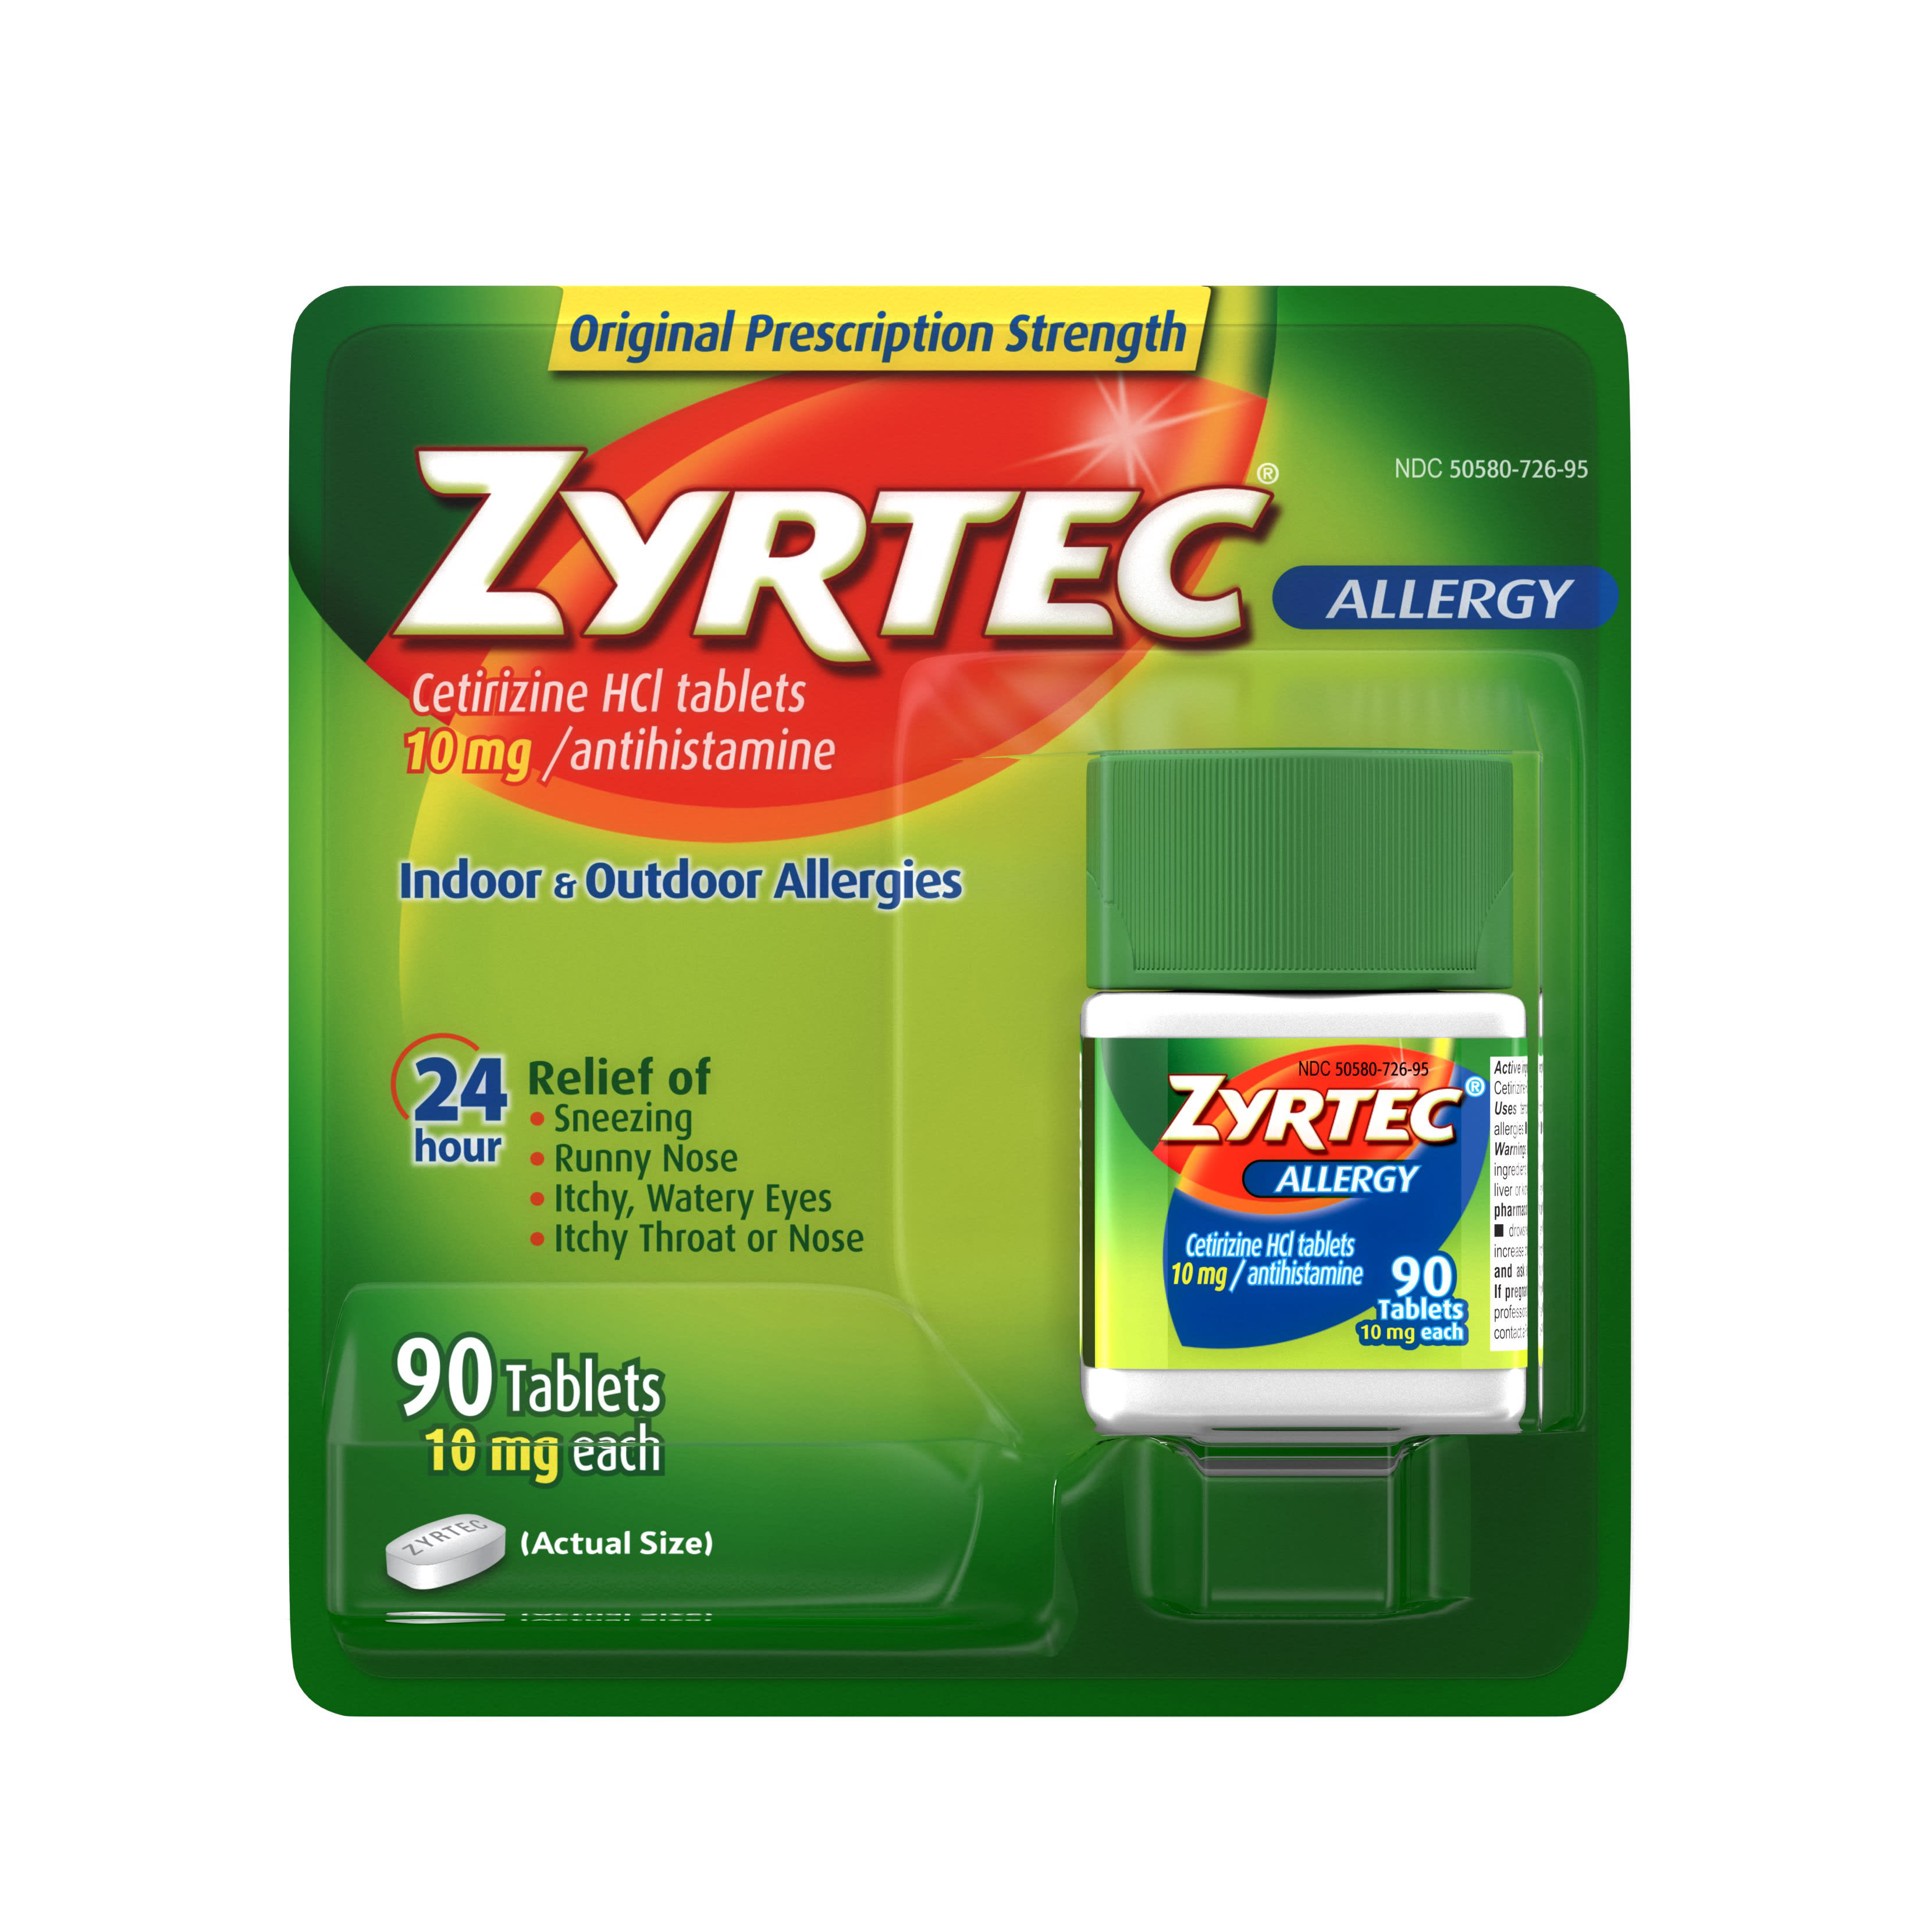 slide 10 of 10, Zyrtec 24 Hour Allergy Relief Tablets, Indoor & Outdoor Allergy Medicine with 10 mg Cetirizine HCl per Antihistamine Tablet, Relief of Allergies Caused by Ragweed & Tree Pollen, 90 ct, 90 ct